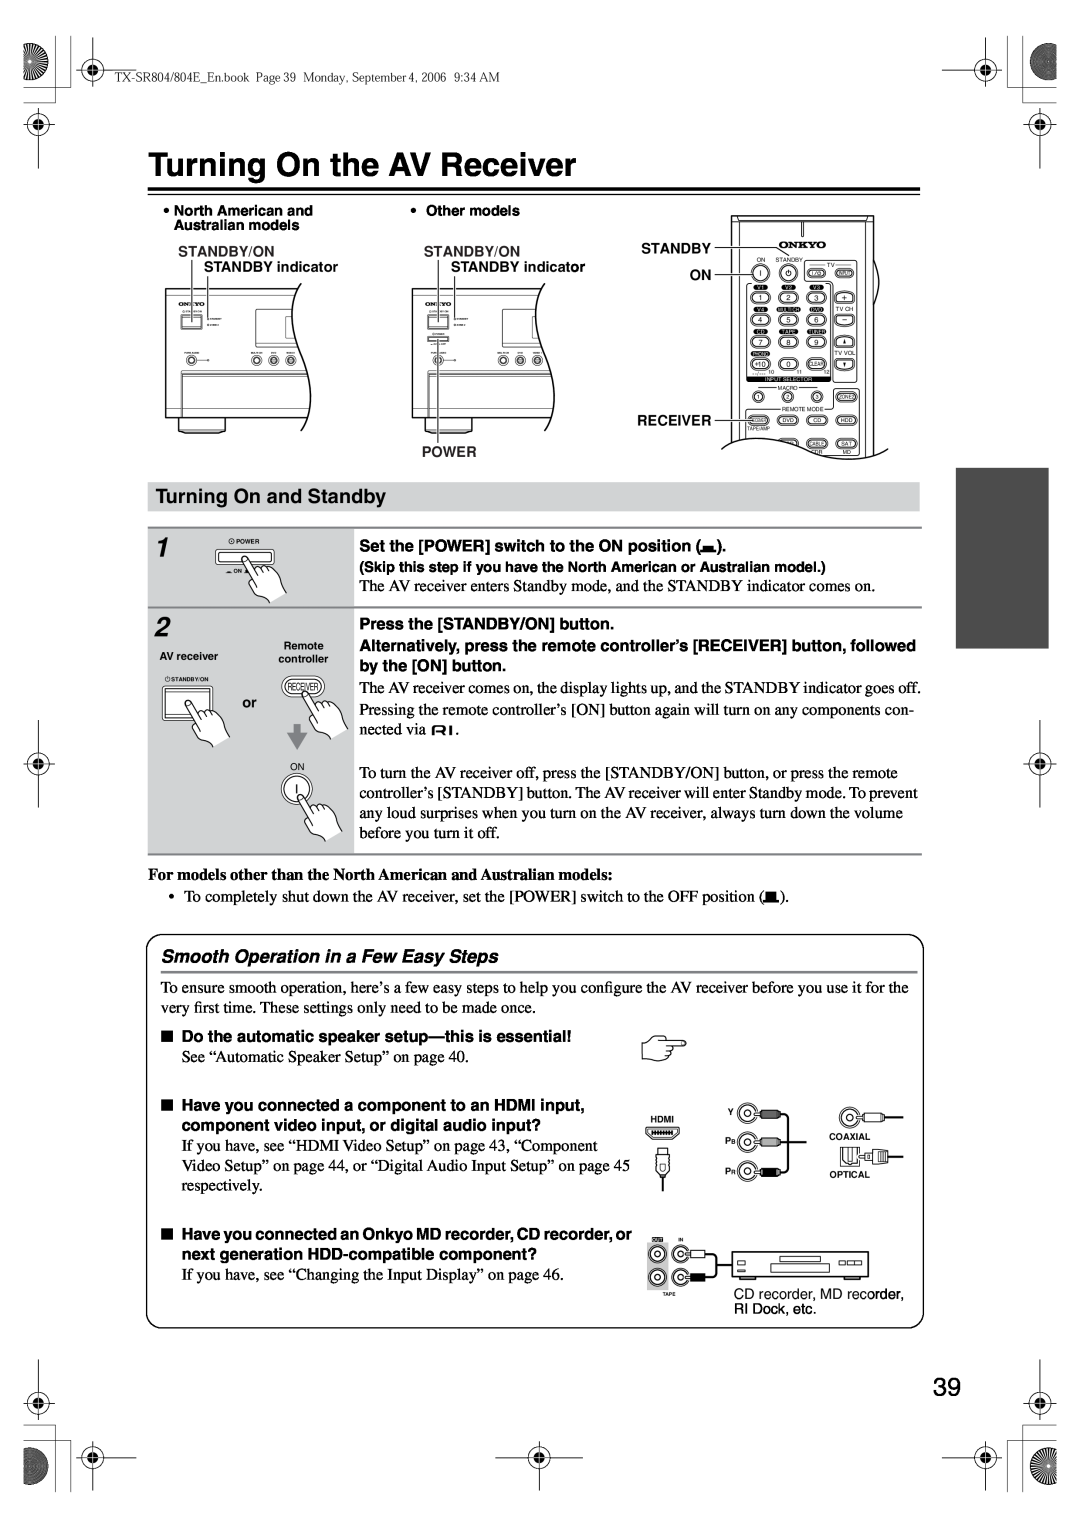 Onkyo TX-SR804E instruction manual Turning On the AV Receiver, Turning On and Standby, Smooth Operation in a Few Easy Steps 